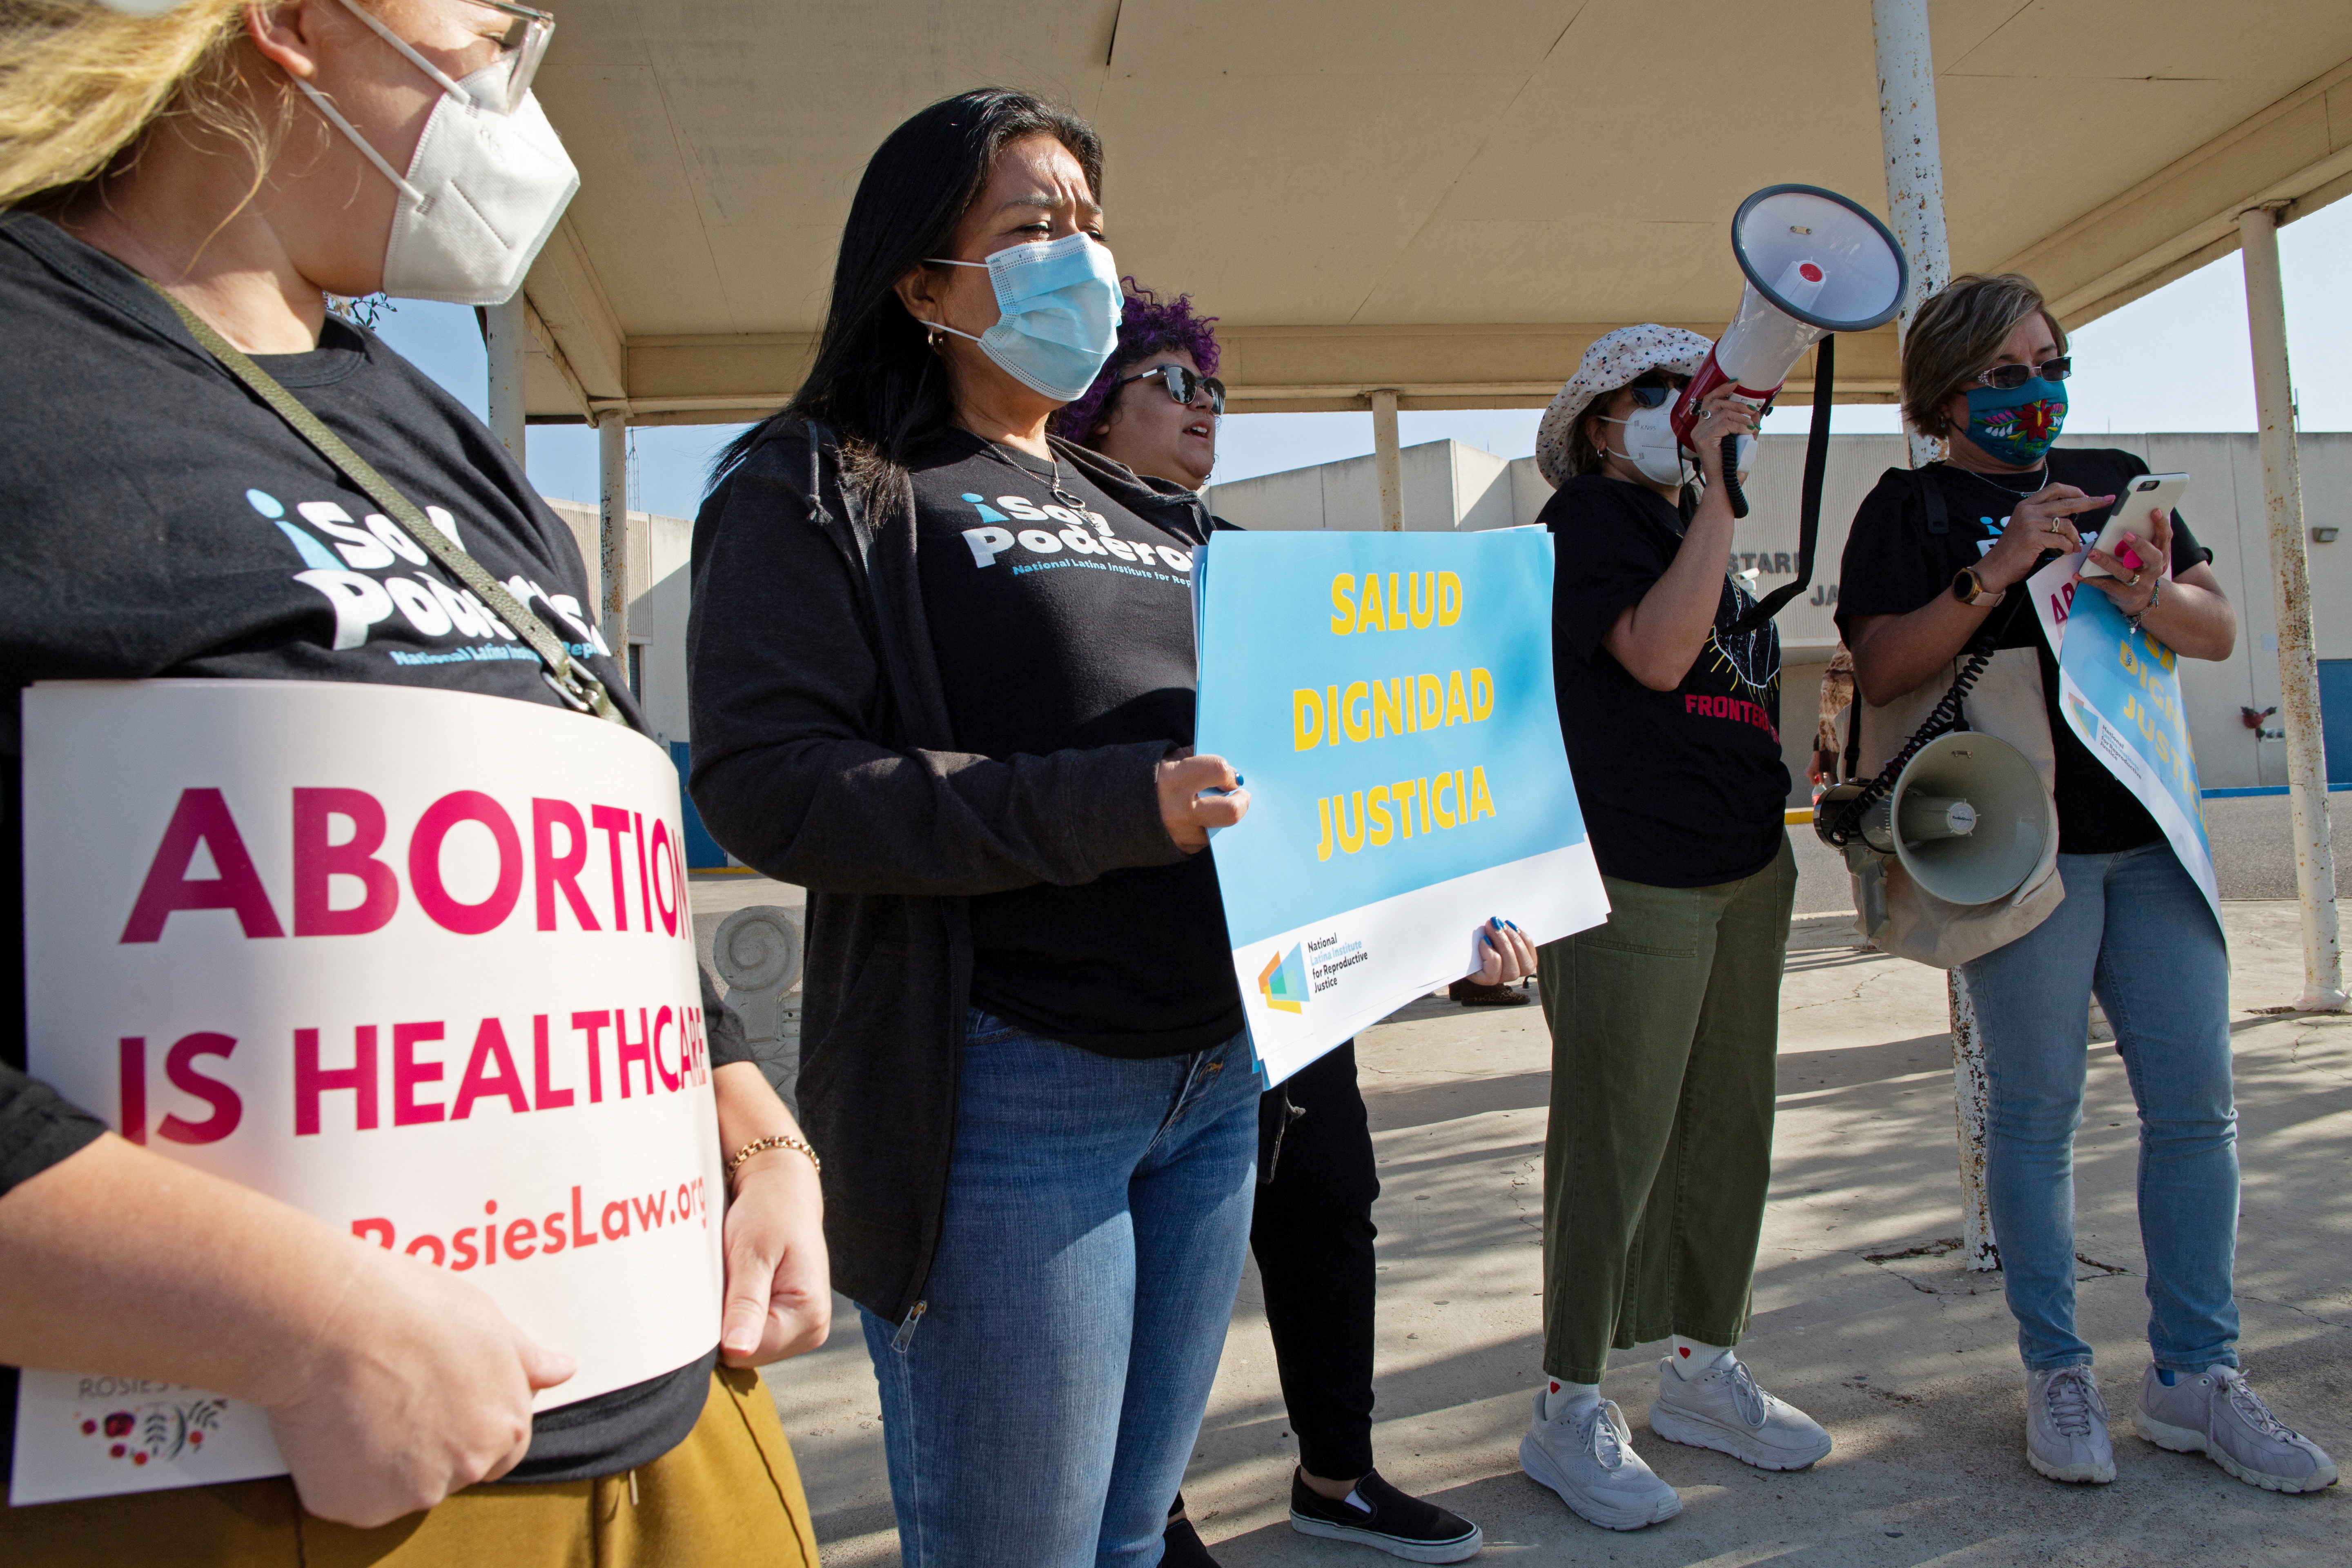 Protesters stand outside the Starr County Jail over abortion charge